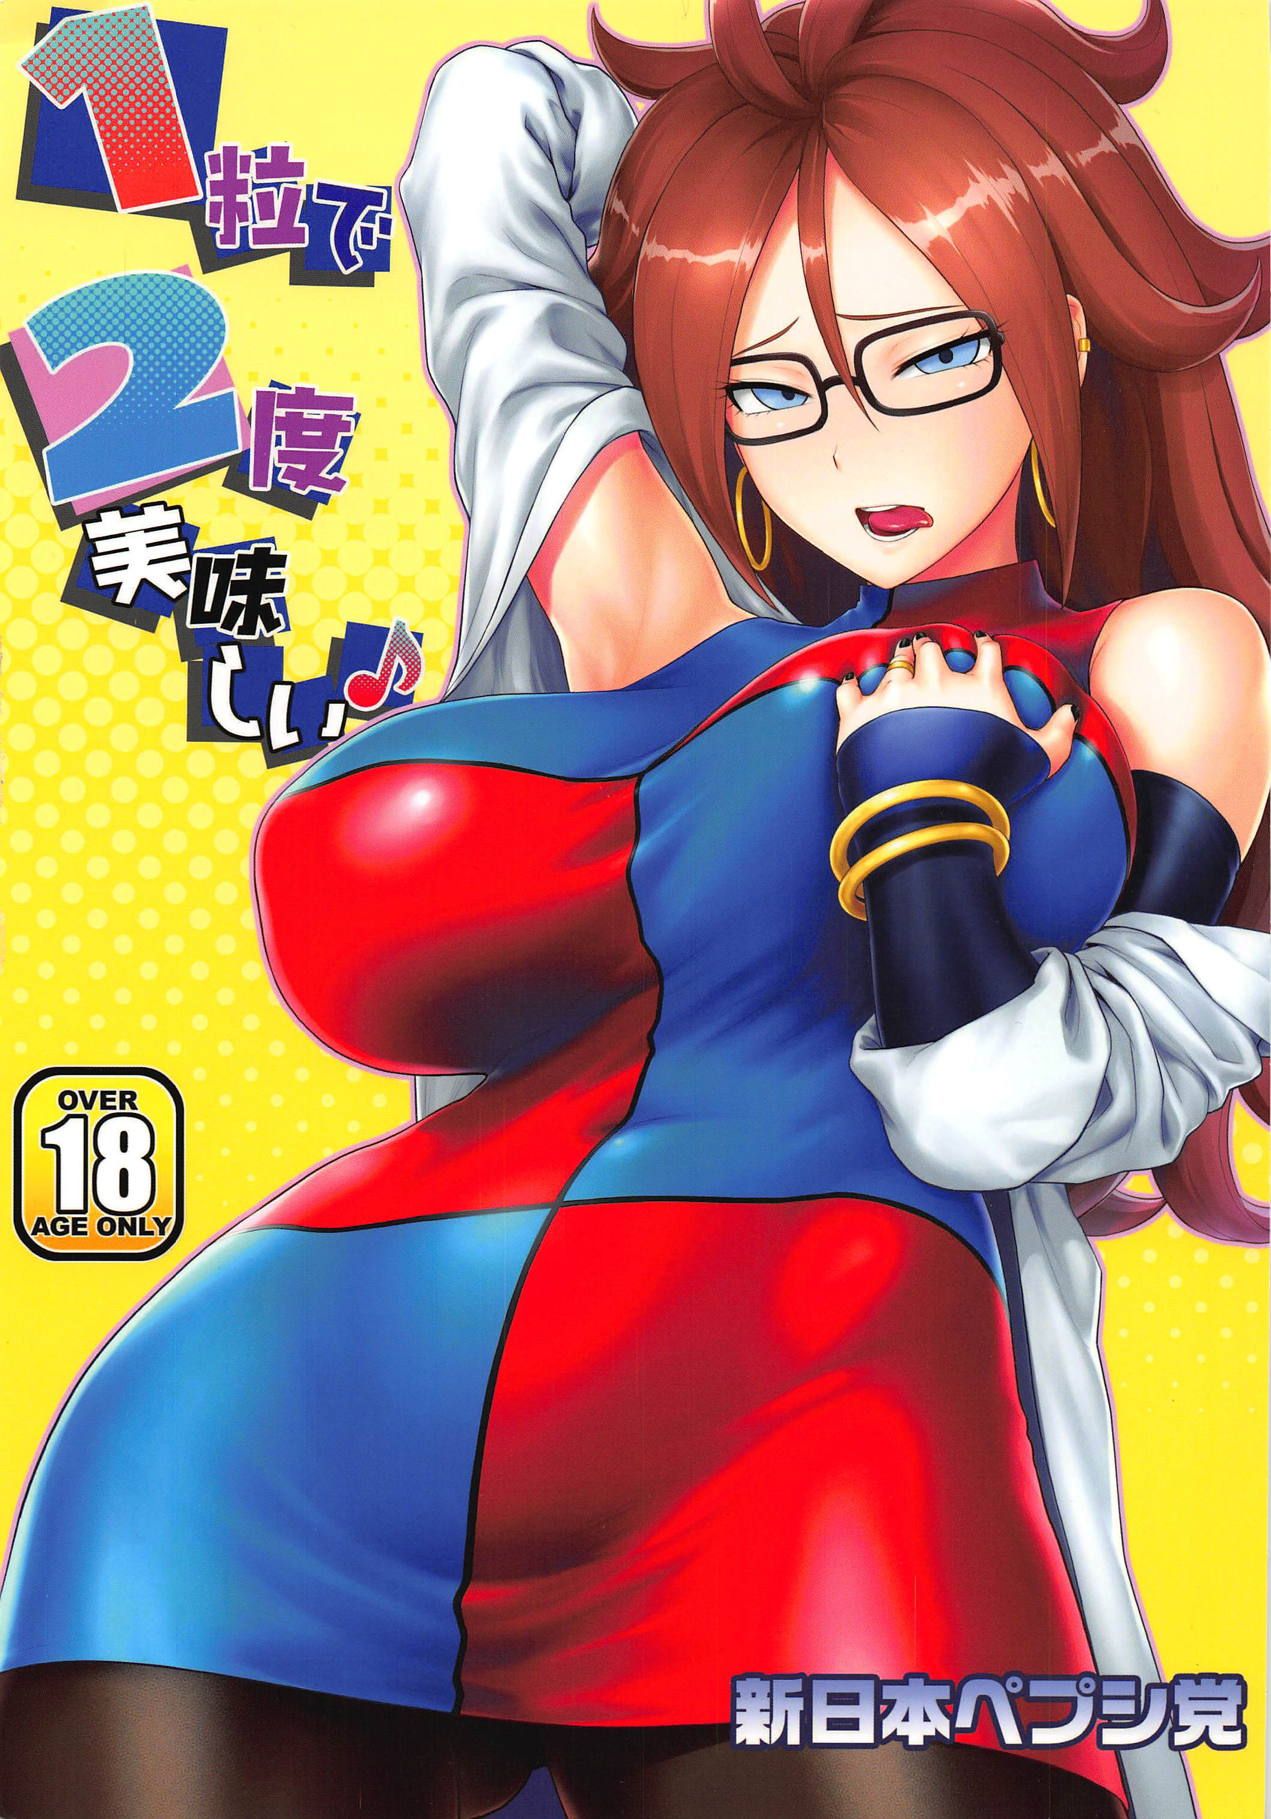 My Favorite Android 21 Pics 8